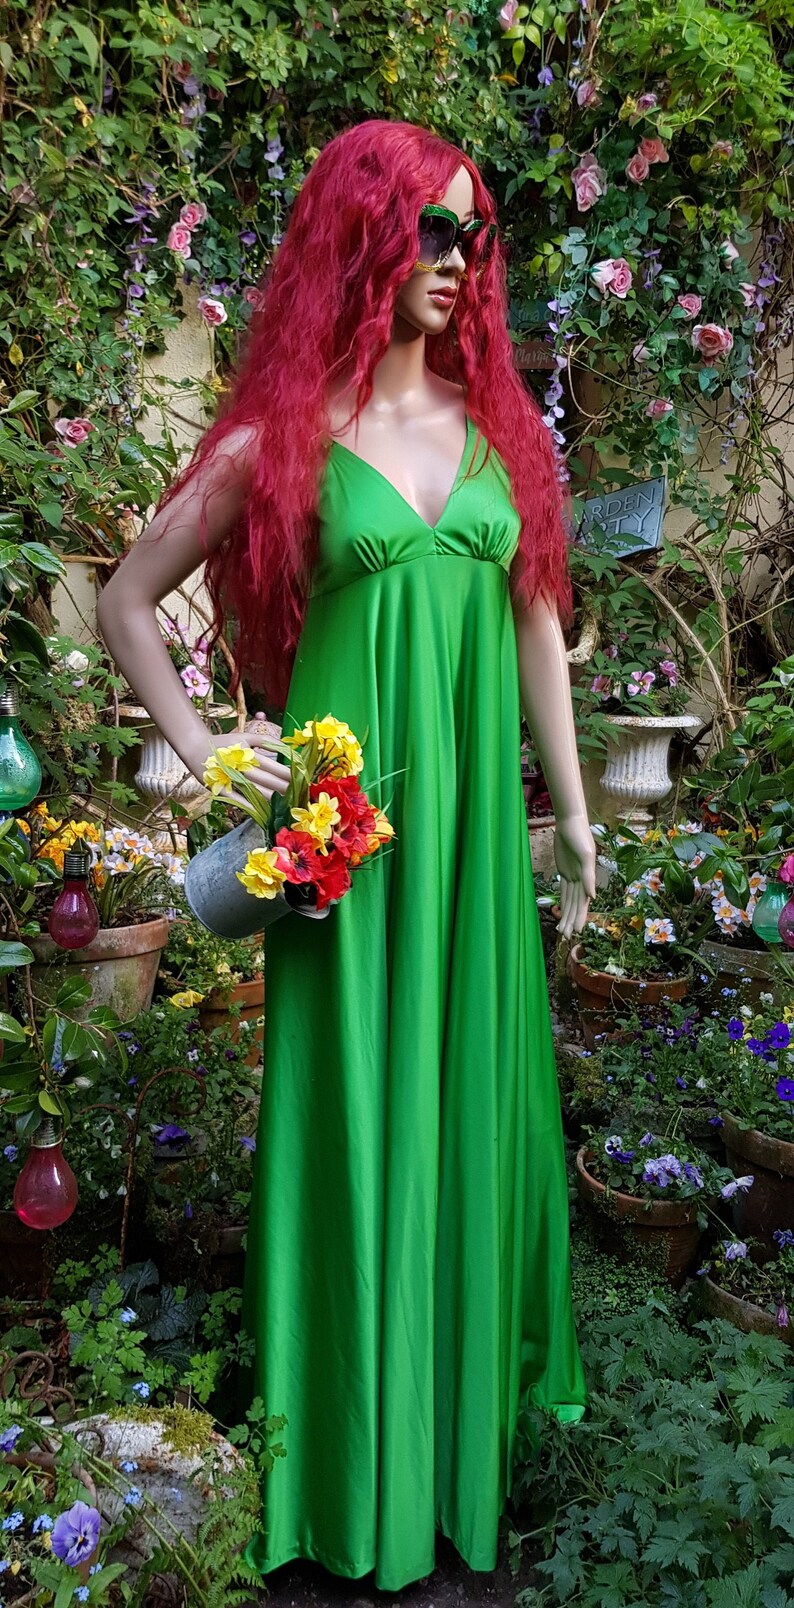 UK 6/8 US 2/4 Fantastic Vintage 1970s Bright Green Slinky Strappy Empire Line Maxi Sun Dress by QUAD image 1